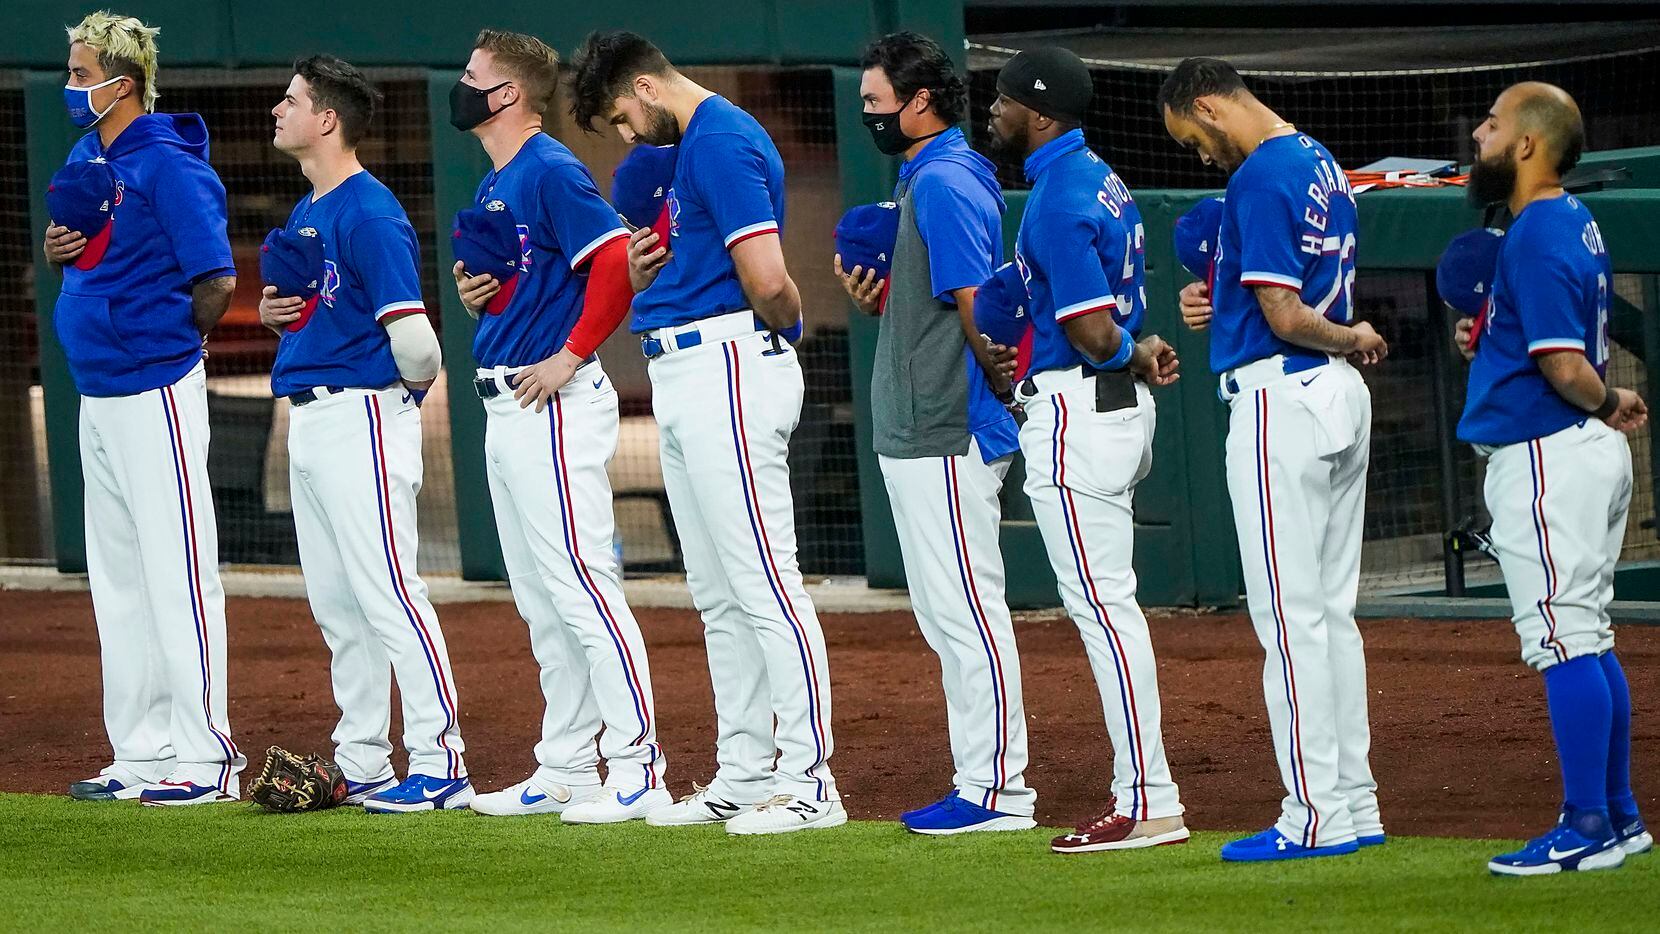 Texas Rangers players stand for the national anthem before exhibition game against the Colorado Rockies at Globe Life Field on Tuesday, July 21, 2020.